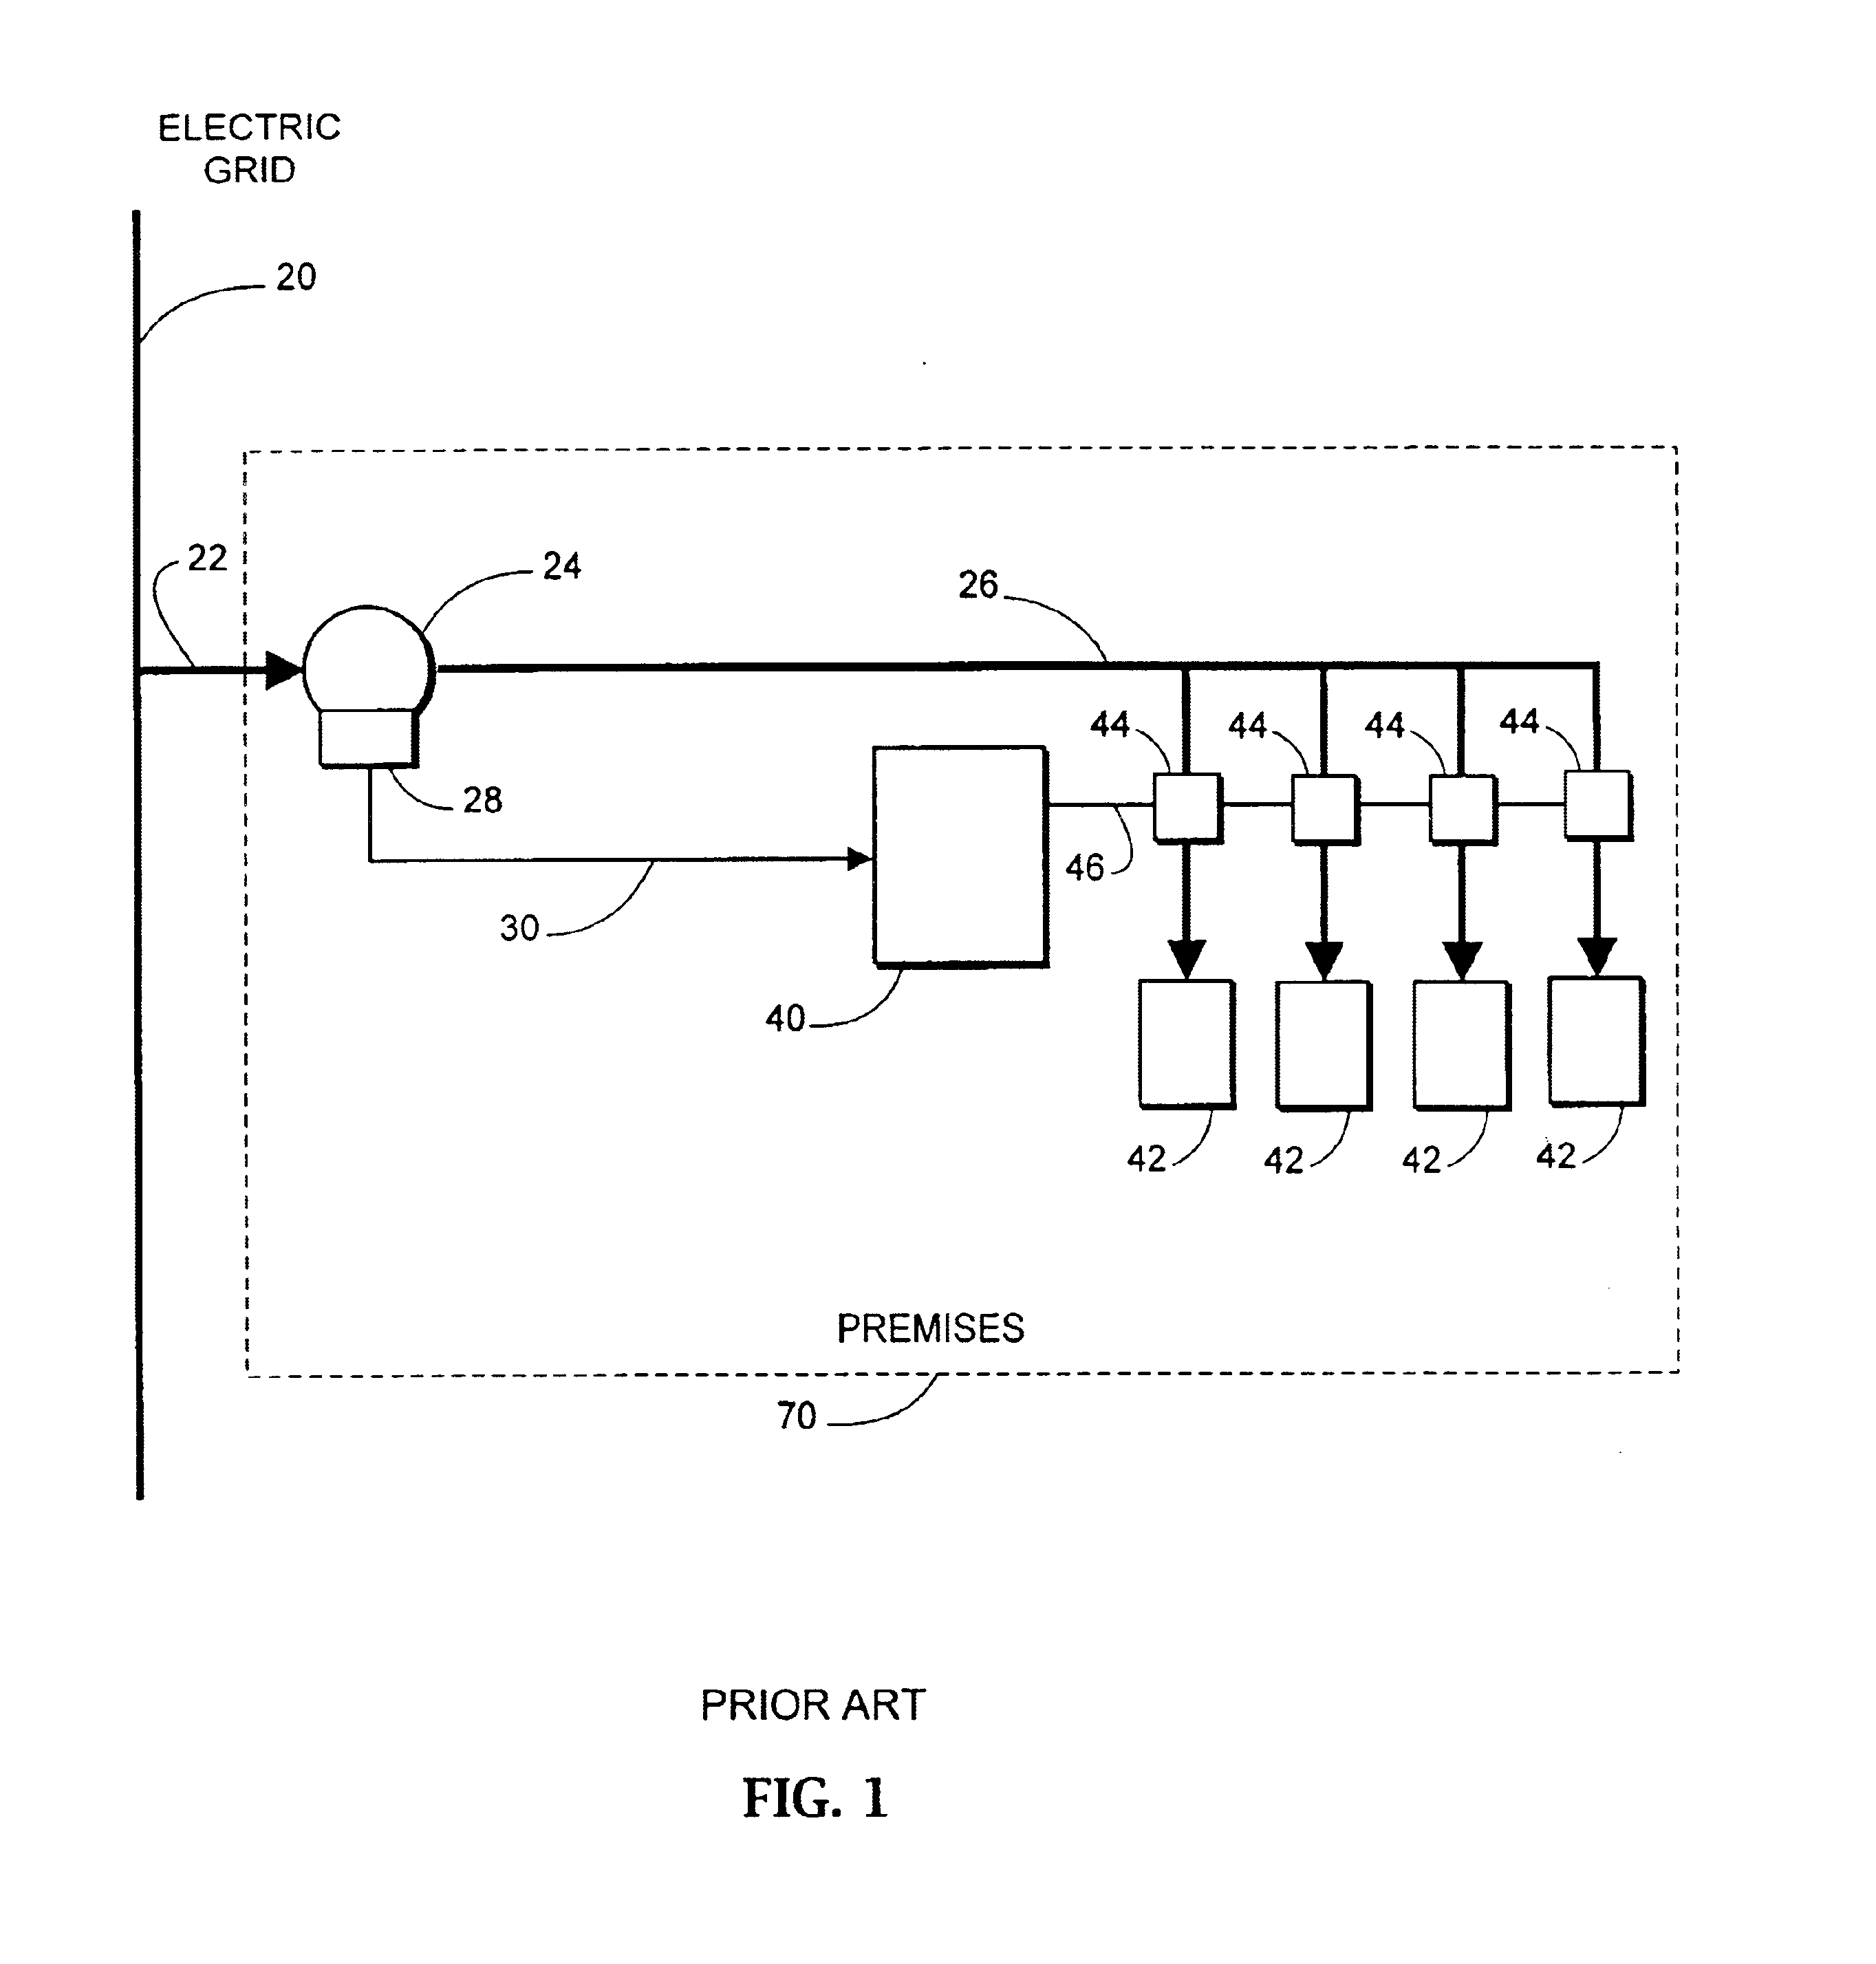 Device for curtailing electric demand